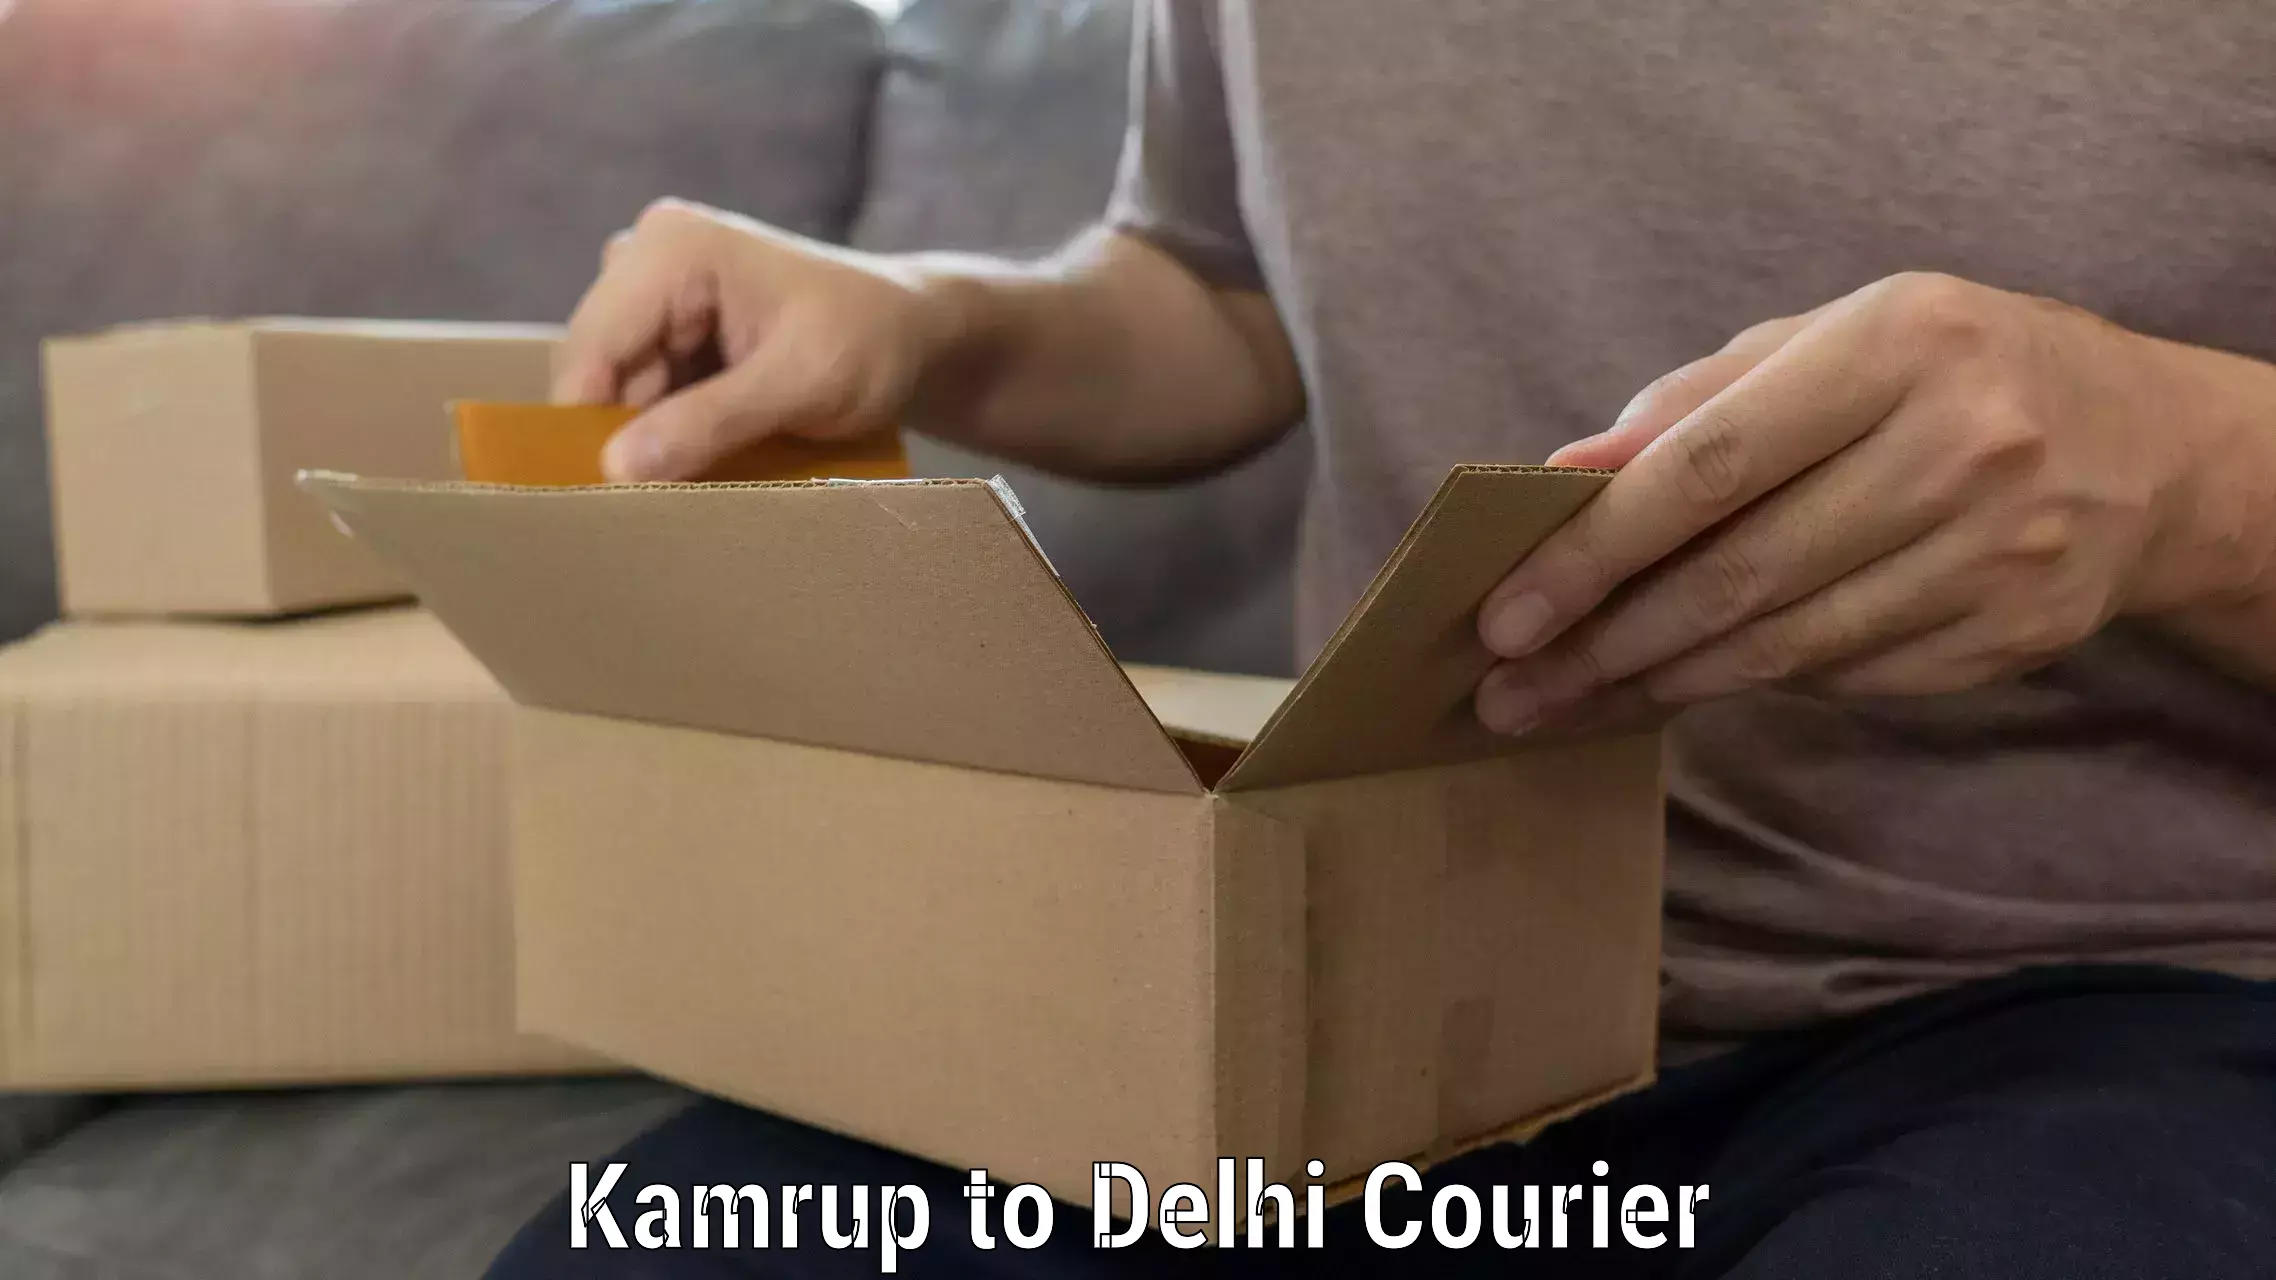 Furniture delivery service Kamrup to Lodhi Road